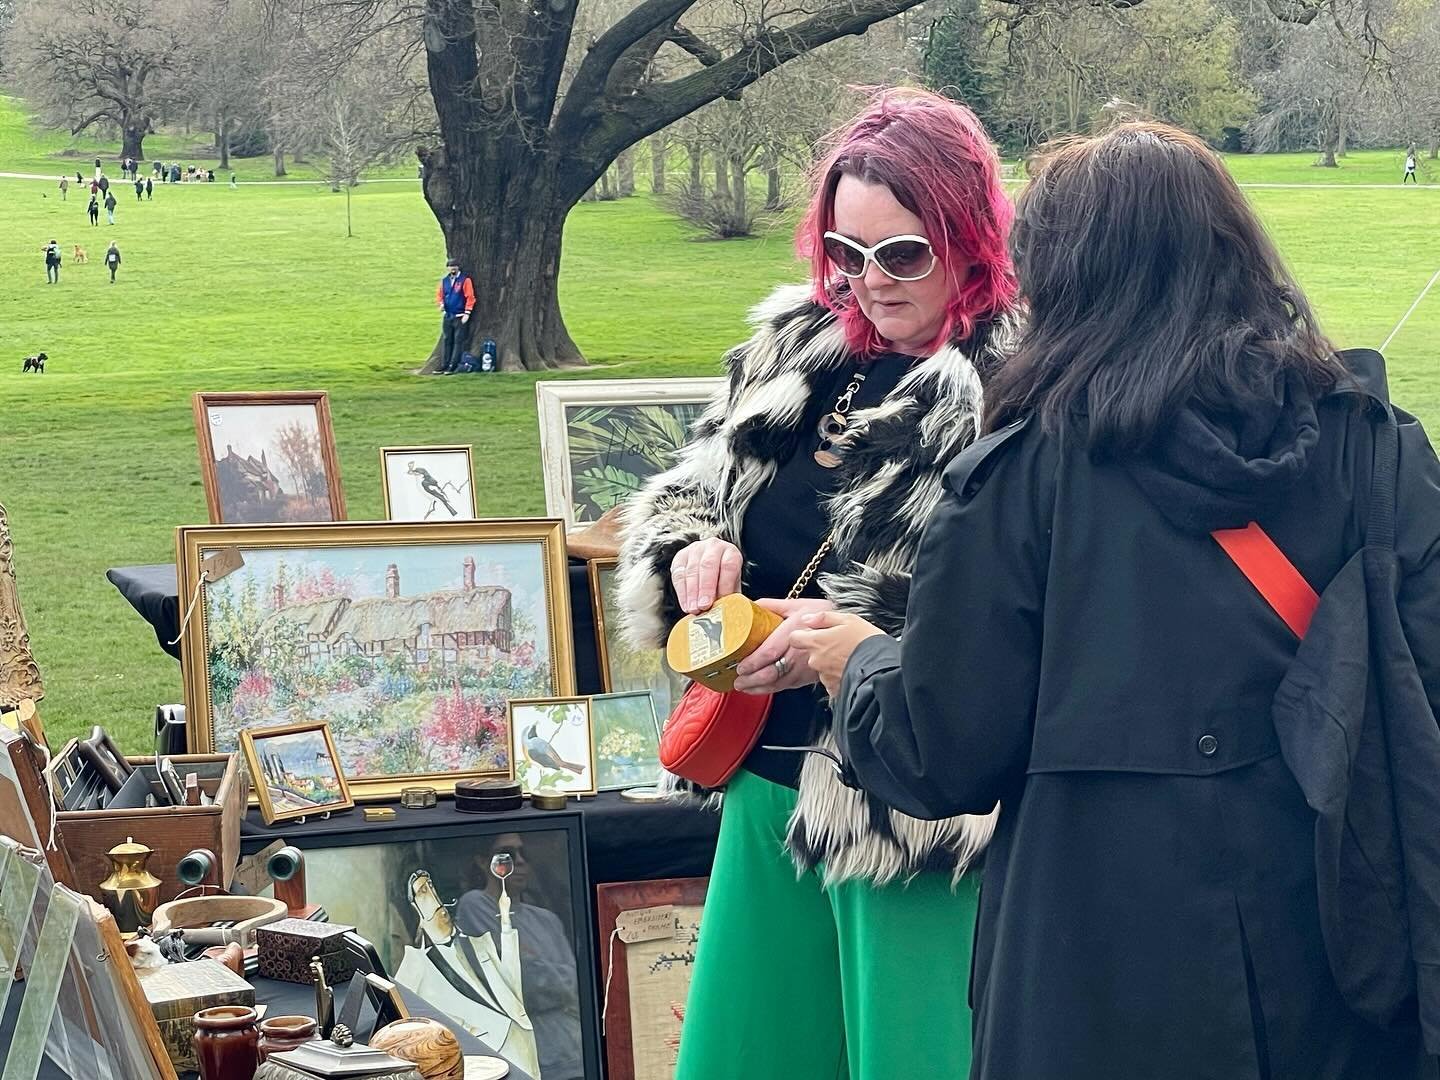 Today! 
Vintage Market at the Mansion in Beckenham Place Park
🌱🏛☀️ @beckenhamplace

Over 50 great vintage dealers in and around the Mansion, you&rsquo;ll find thousands of things to feast your eyes on, including mid 20th-century furniture, lighting